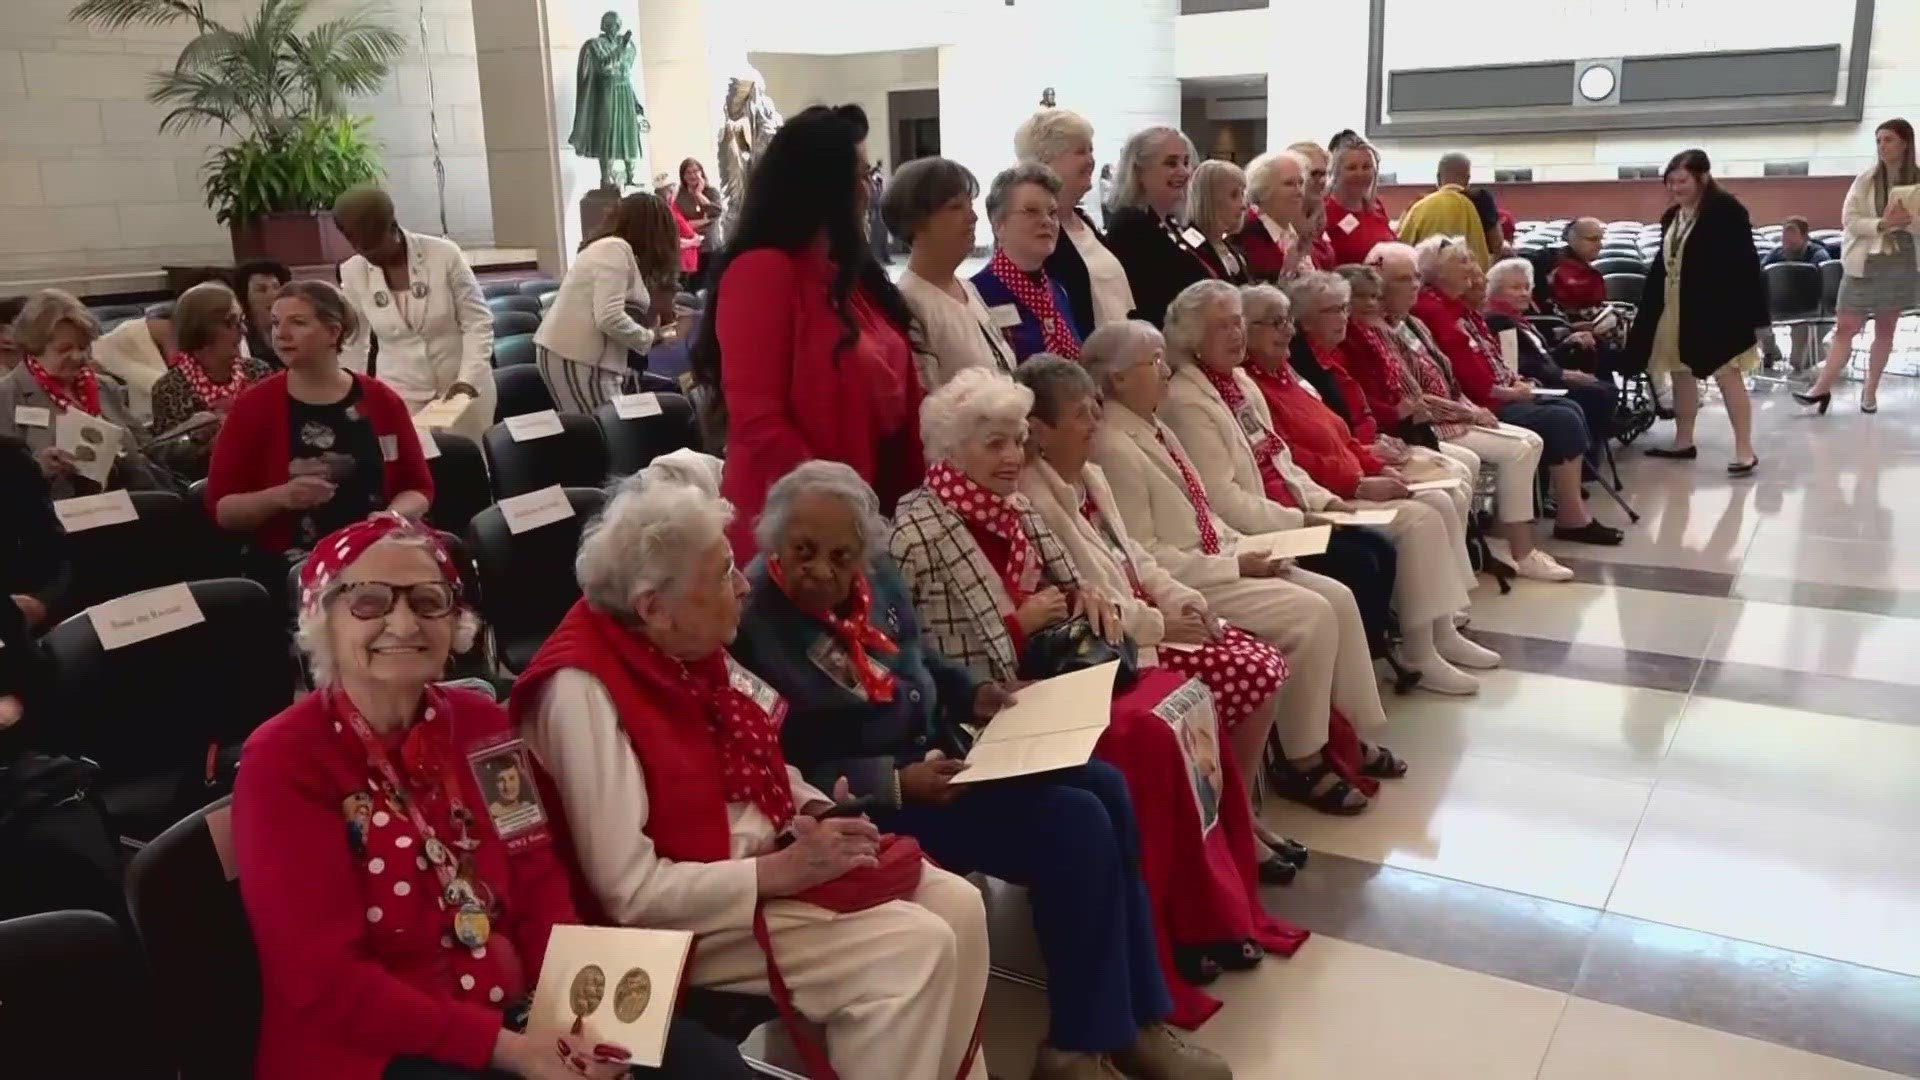 Dozens of women received the congressional gold medal on Capitol Hill. The highest civilian honor in the nation.